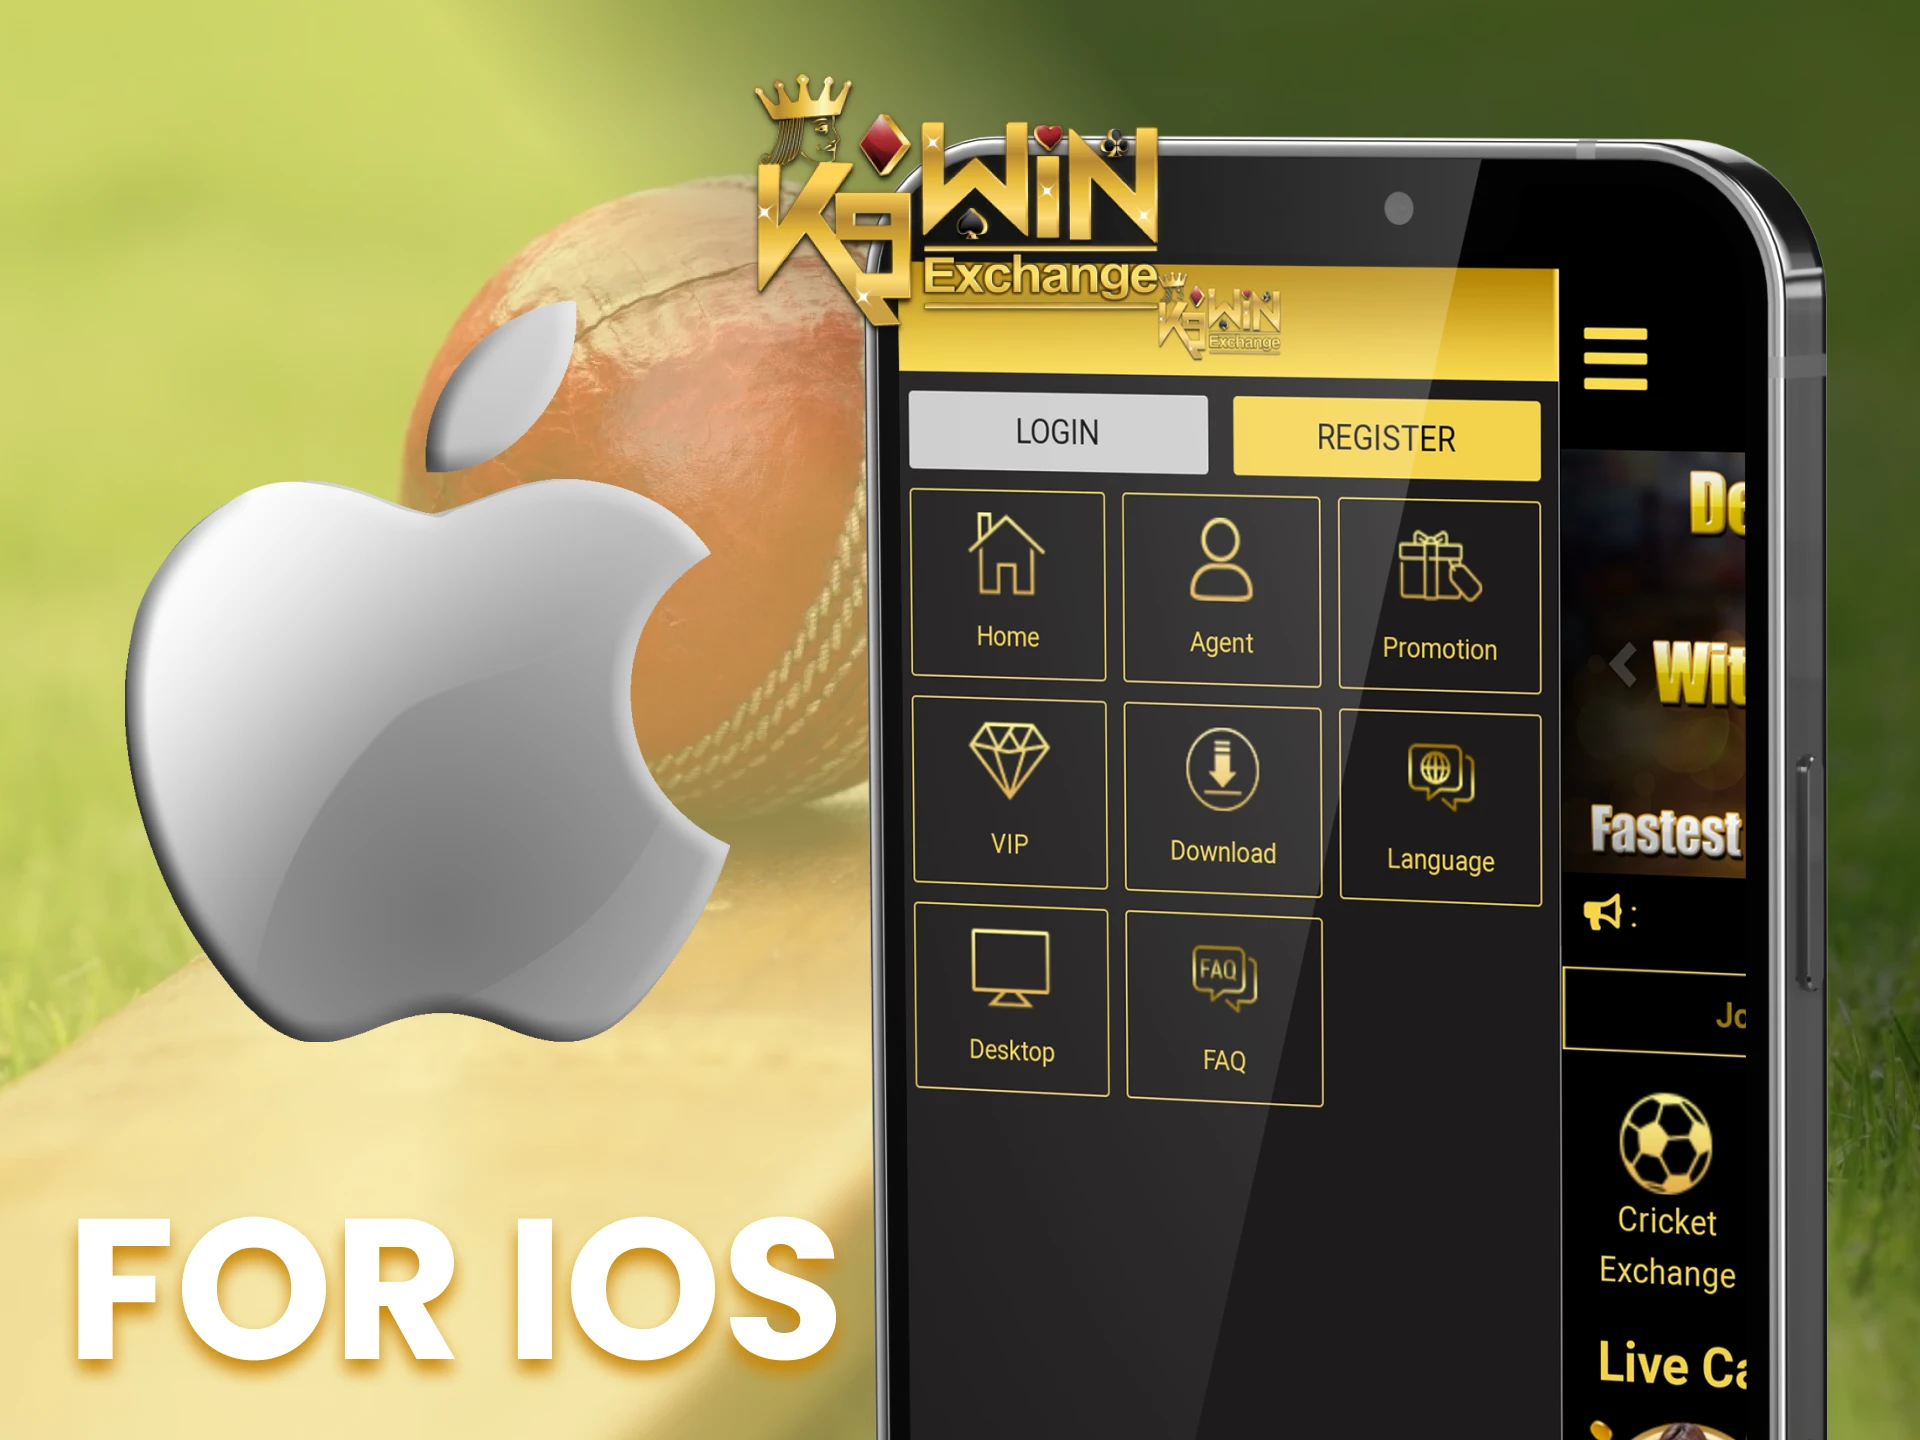 Install the K9Win app by downloading it.